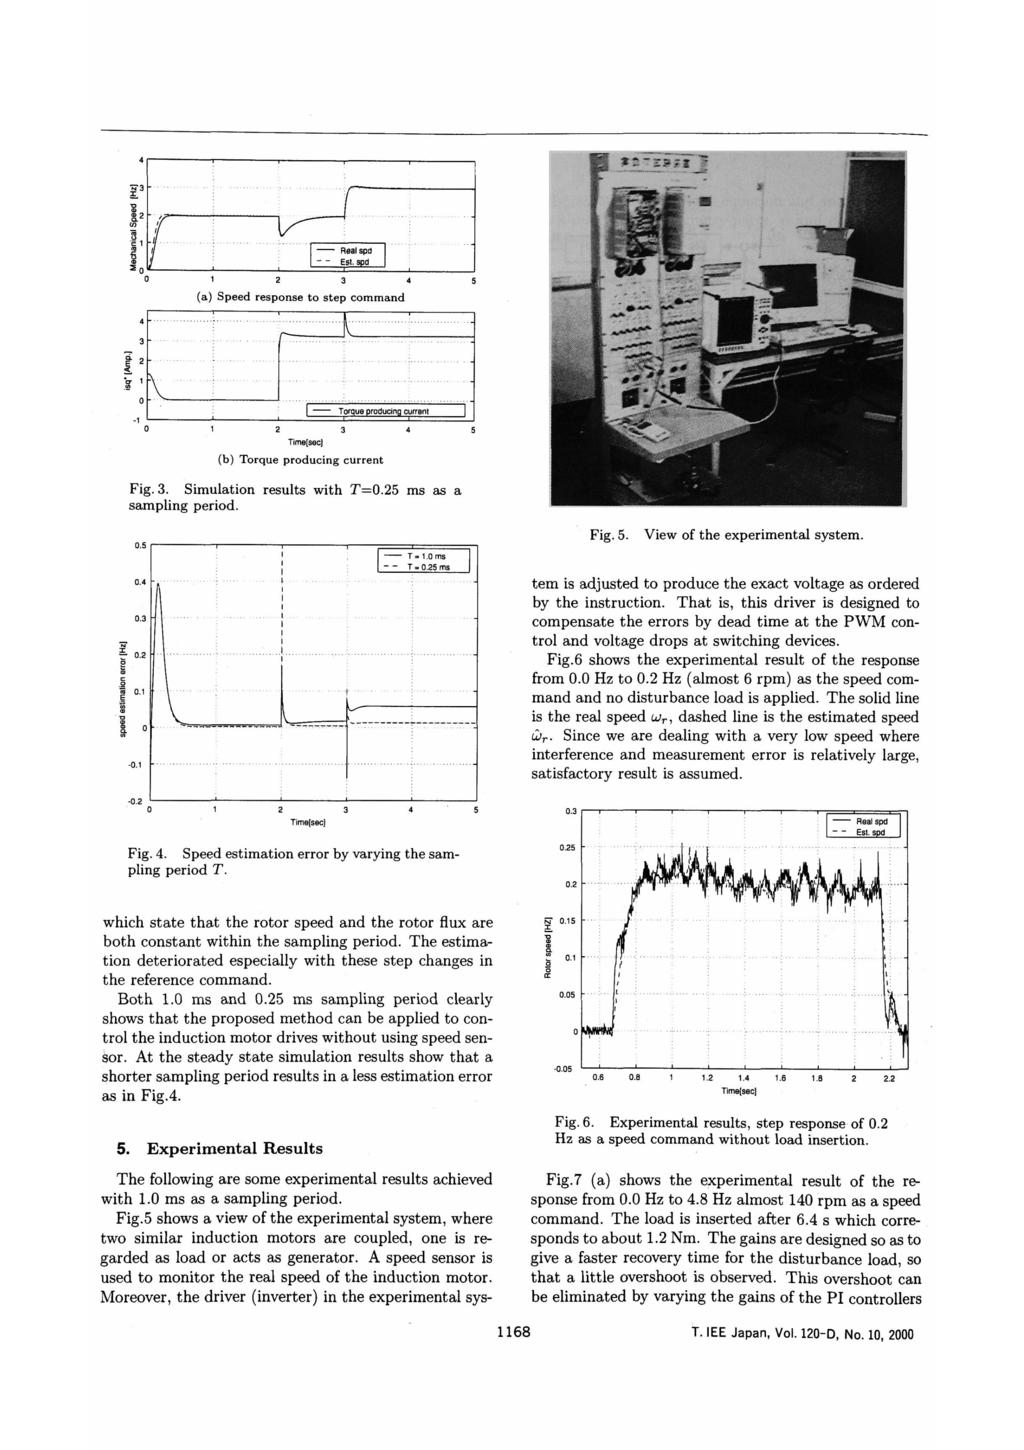 Fig. 3. Simulation results with T=0.25 ms as a sampling period. Fig. 5. View of the experimental system. tem is adjusted to produce the exact voltage as ordered by the instruction.